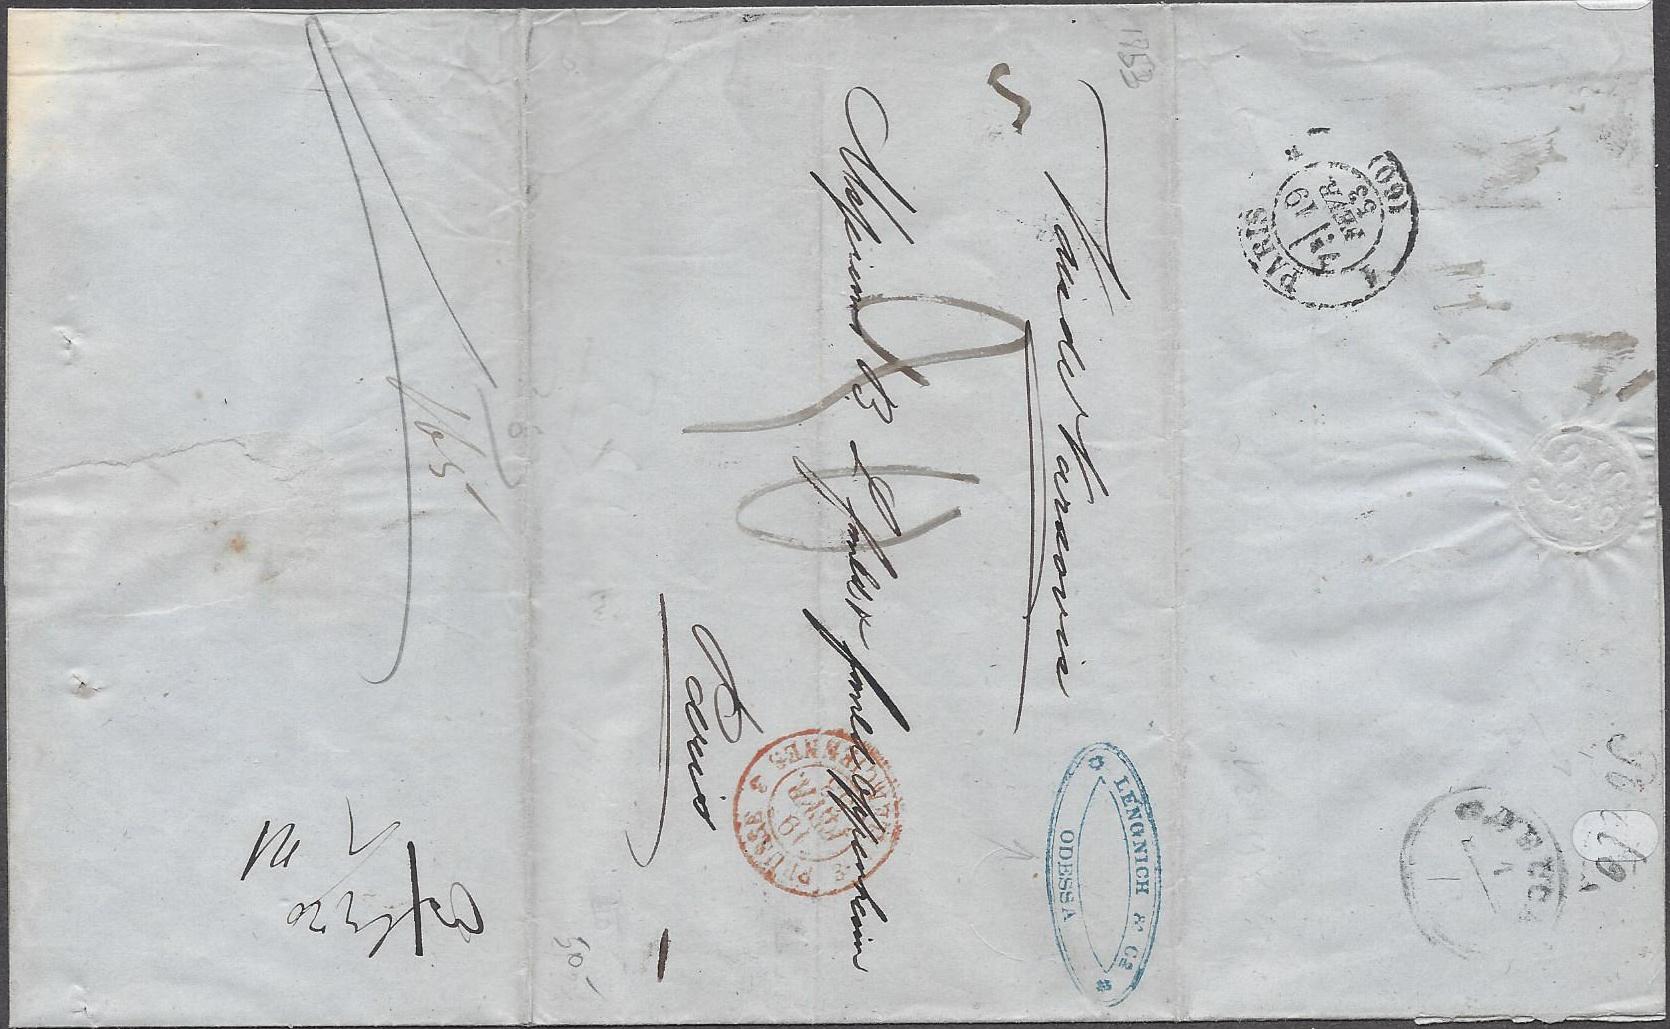 Russia Postal History - Stampless Covers Odessa Scott 2501853 